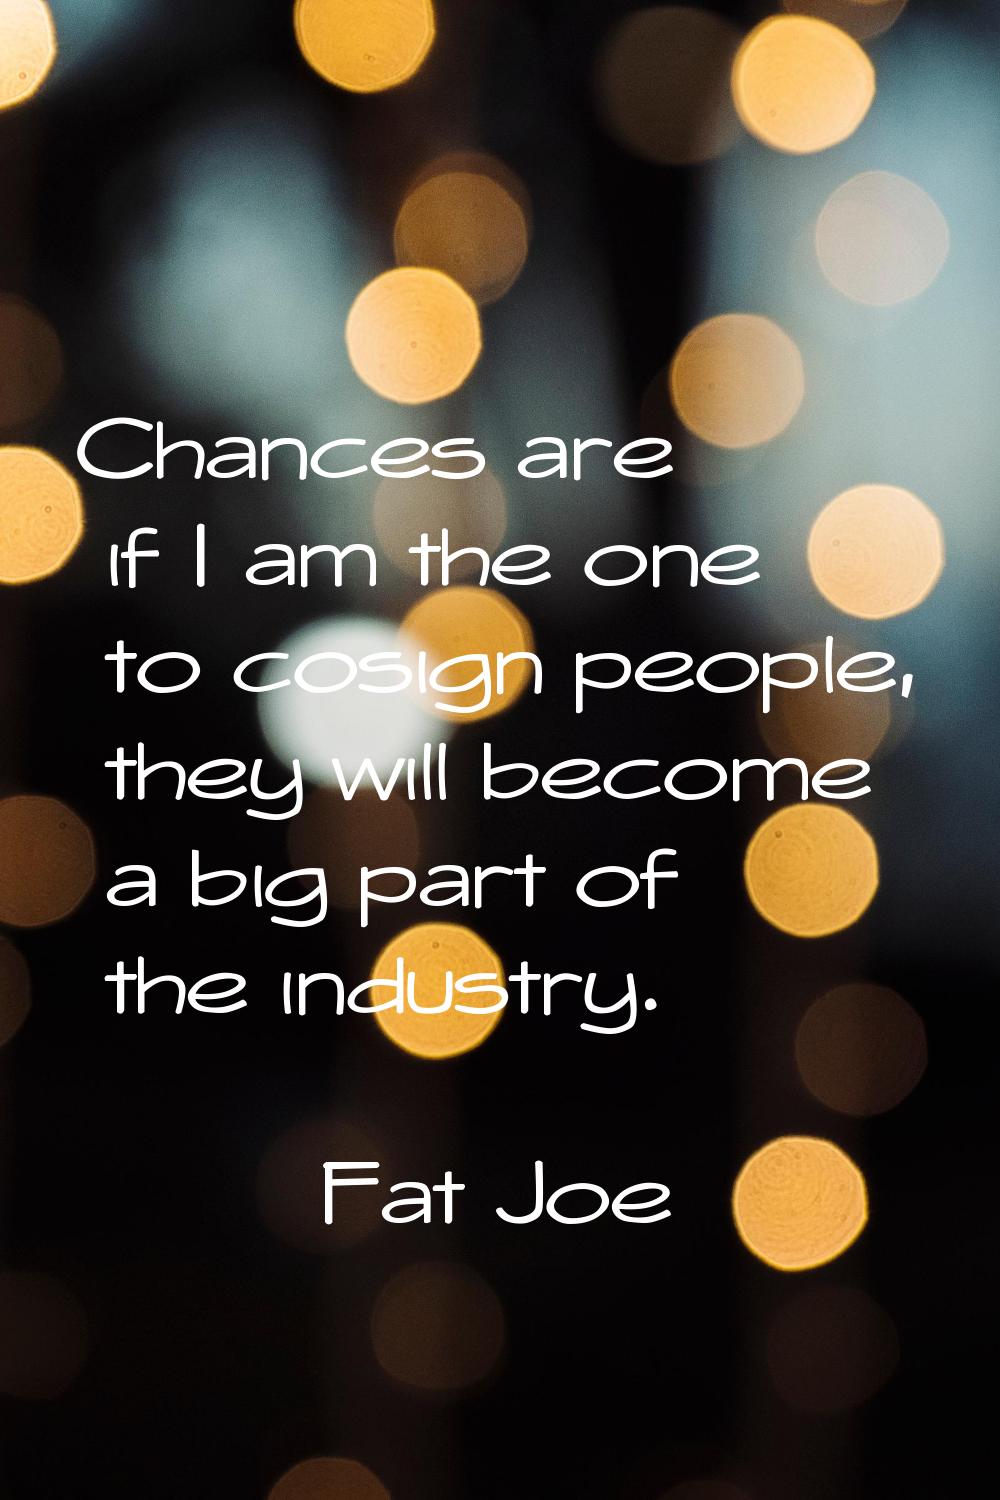 Chances are if I am the one to cosign people, they will become a big part of the industry.